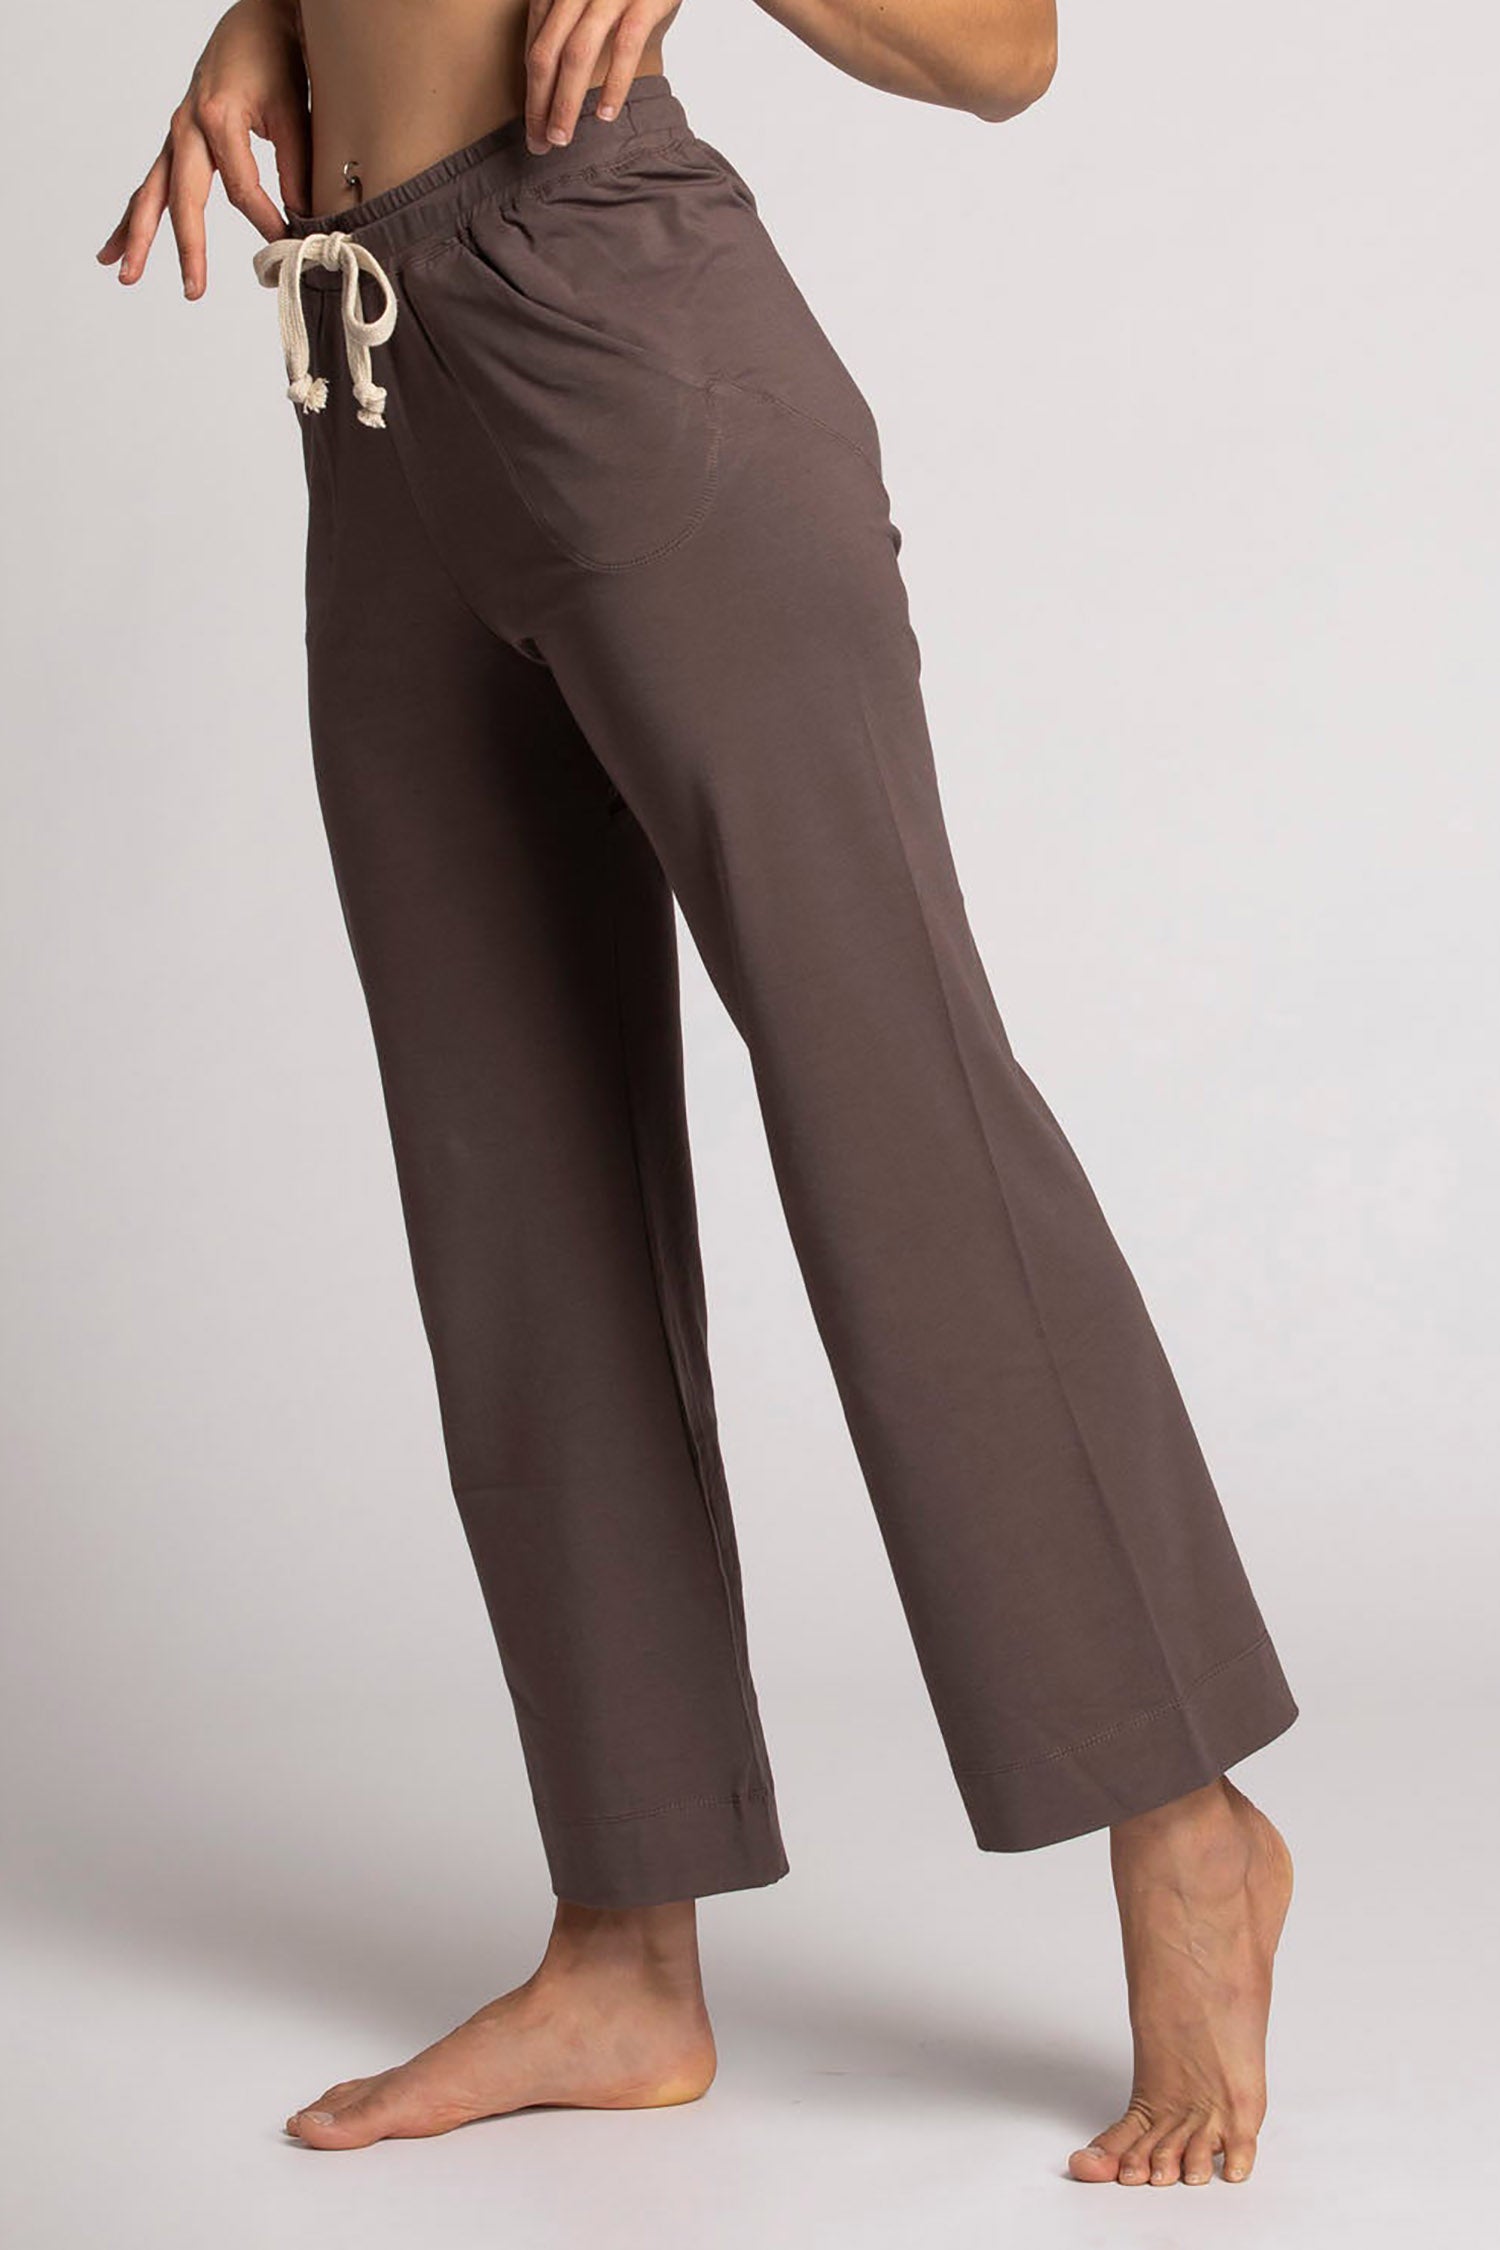 lounge pants for women | Nordstrom